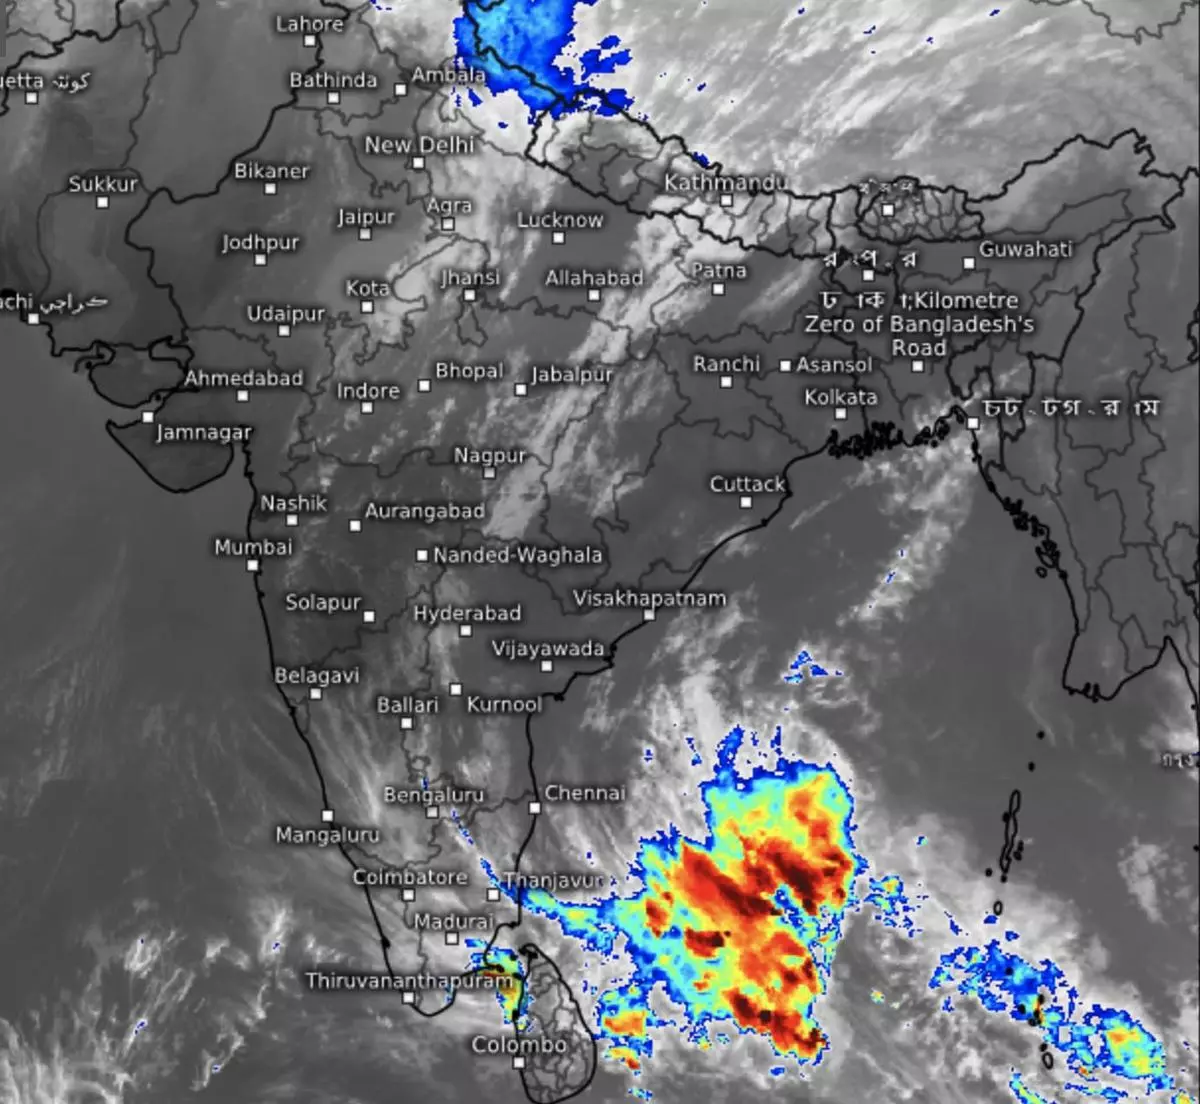 Thunderstorms from a depression over the South-West Bay of Bengal had sent in narrow rain bands between Cuddalore and Muthupet in Tamil Nadu on Monday evening. Heavy rain is forecast for parts of South Tamil Nadu for two days.